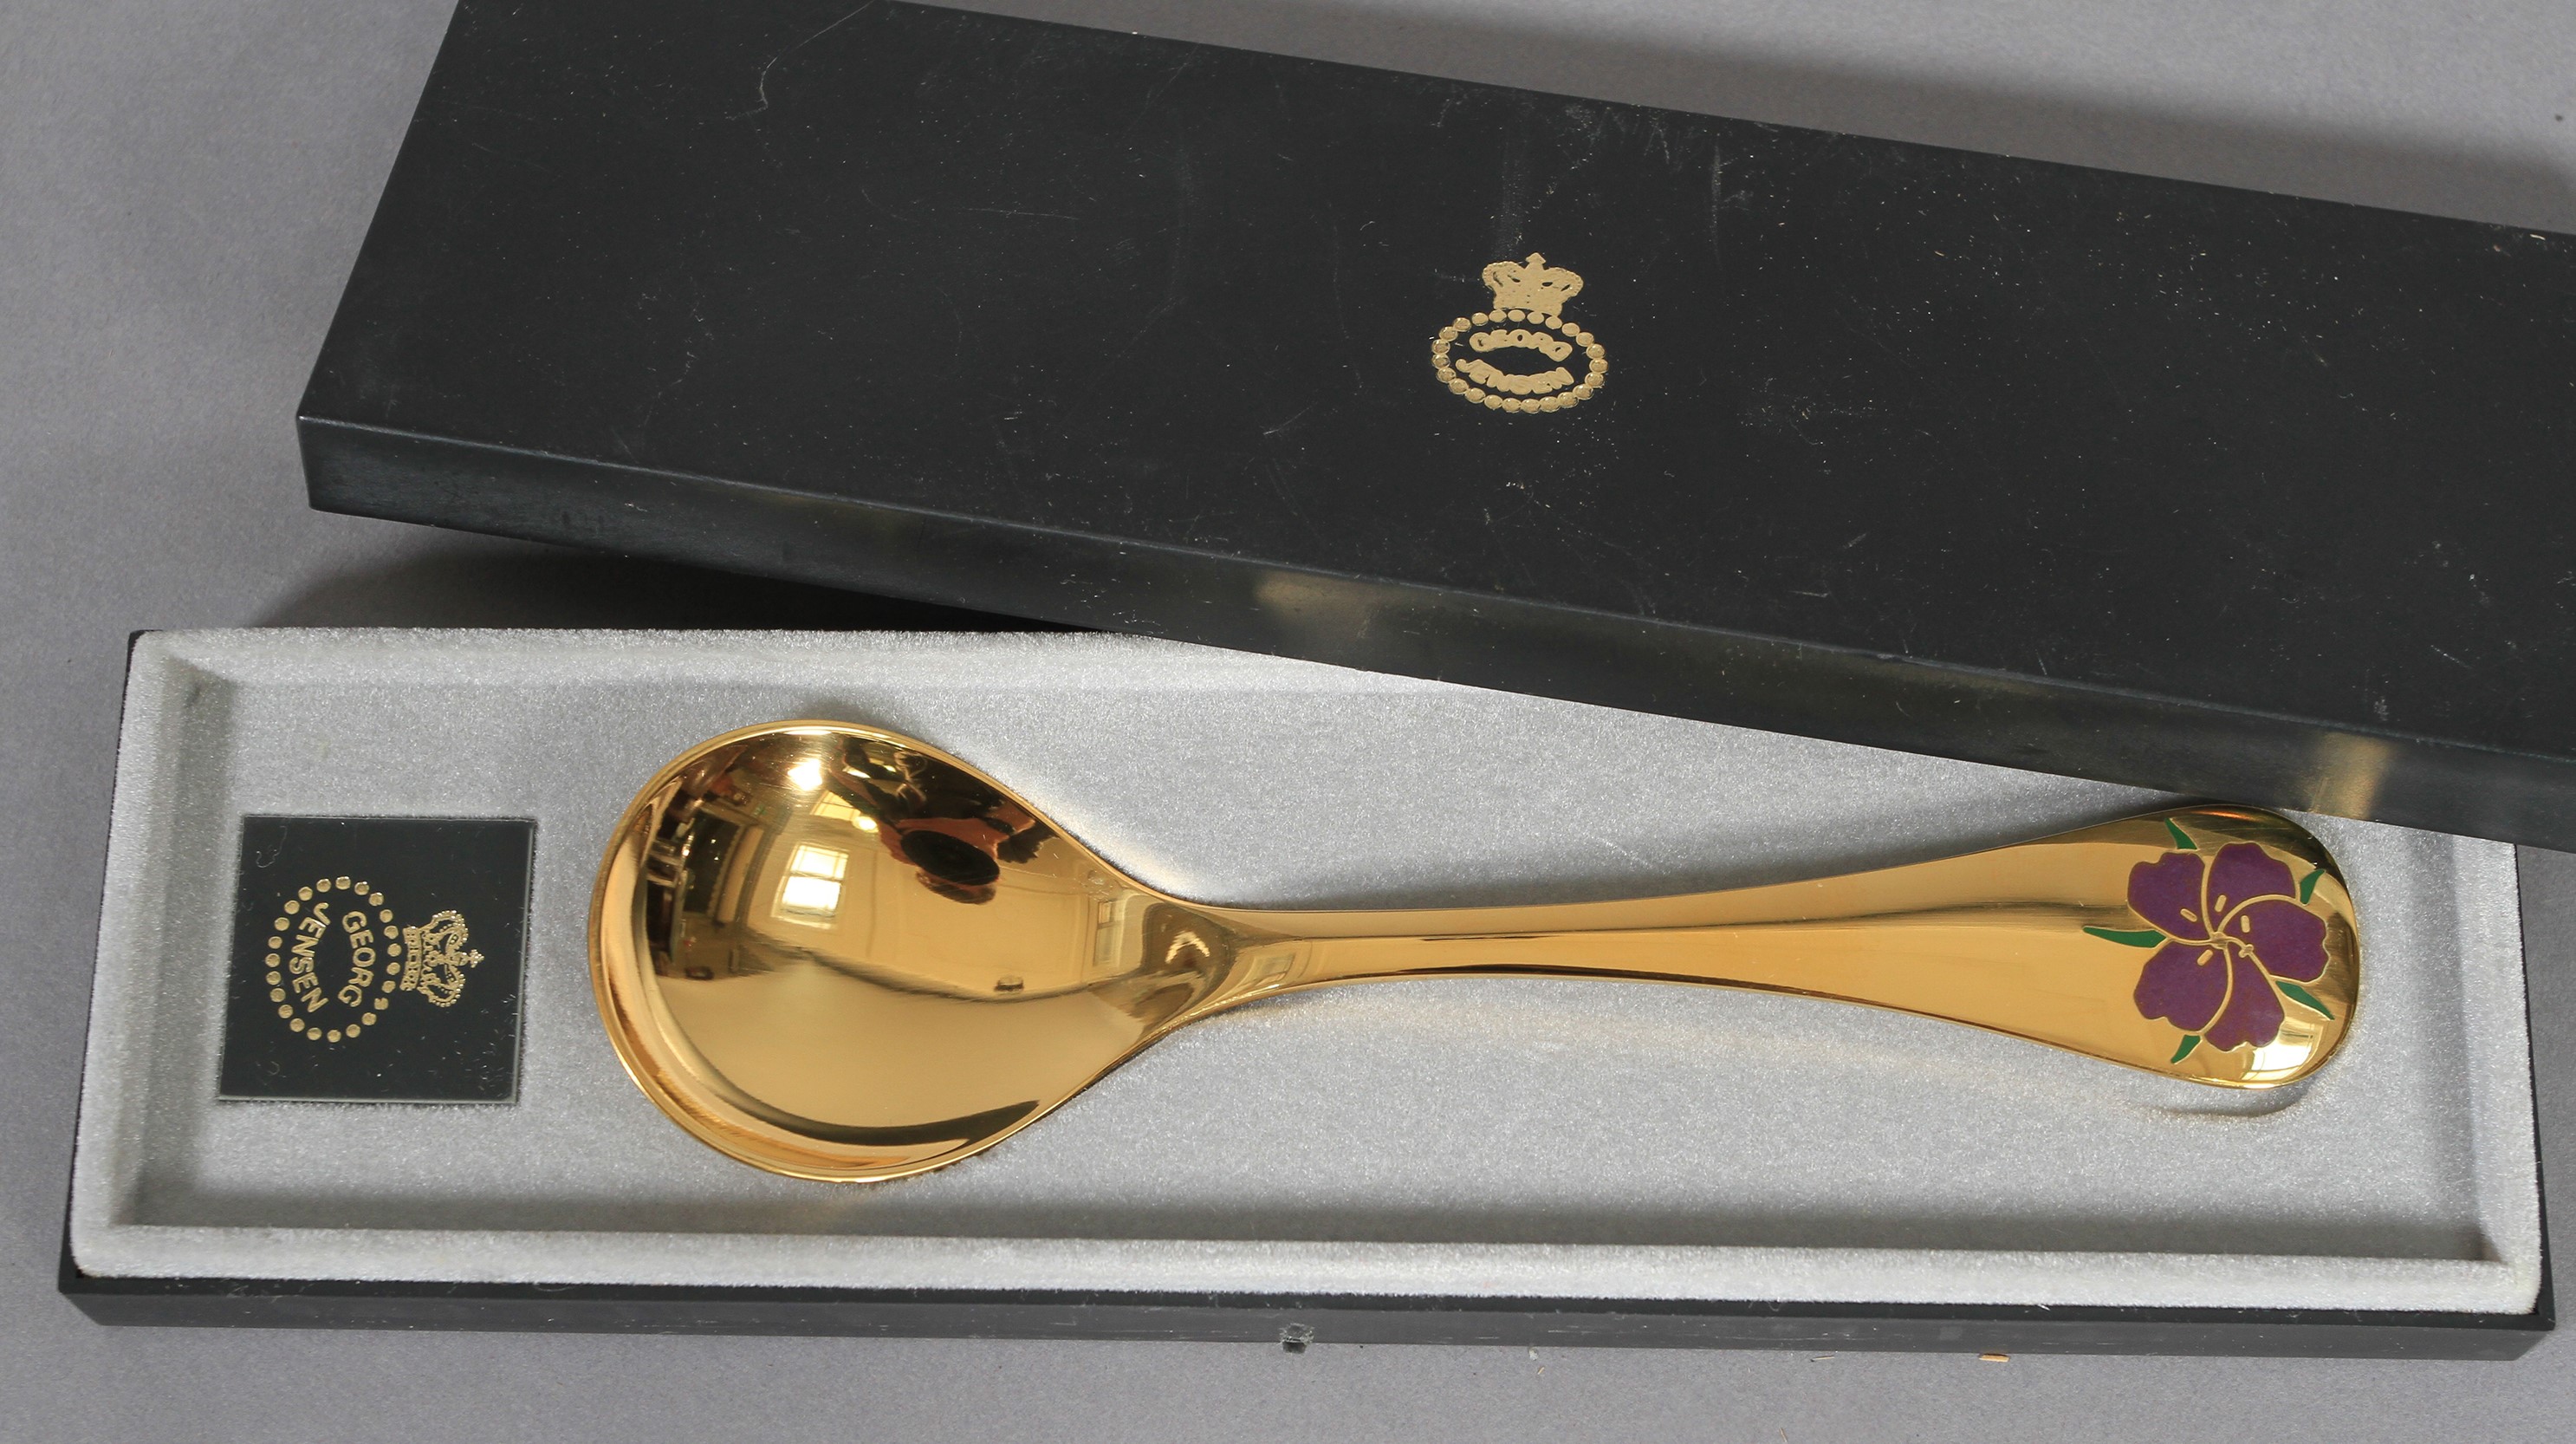 Georg Jensen, a .925 silver gilt year spoon for 1 974 with corn cockle motif in aubergine and